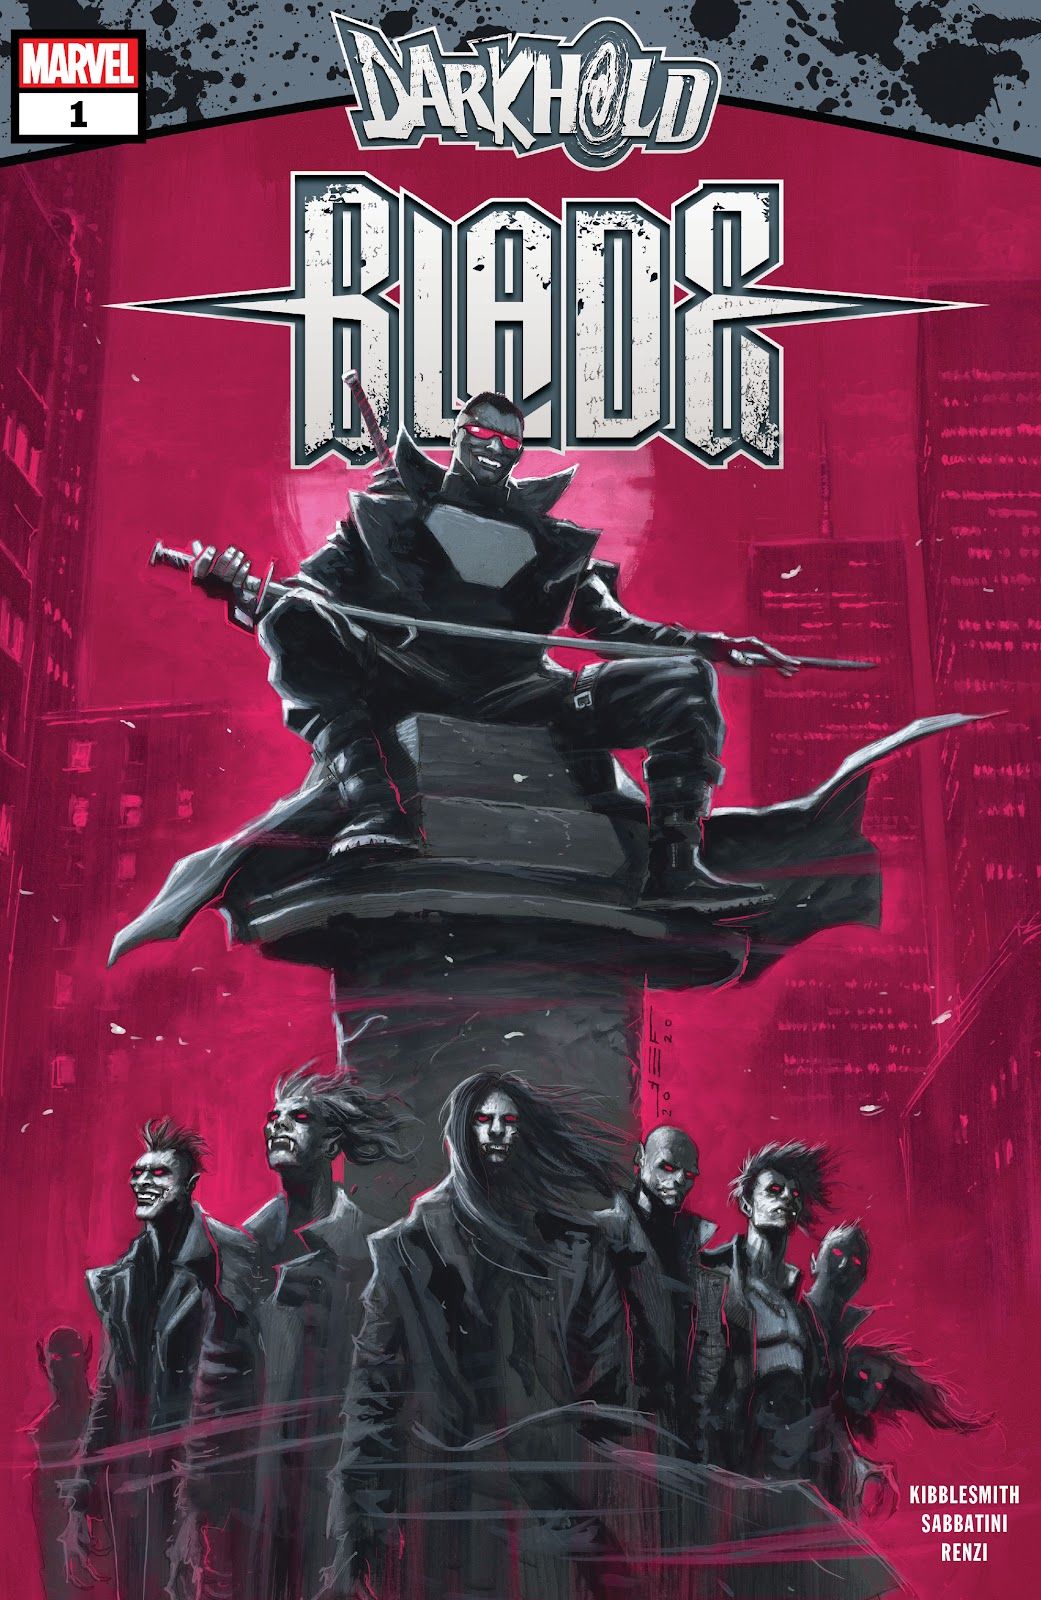 Cover of Darkhold: Blade #1